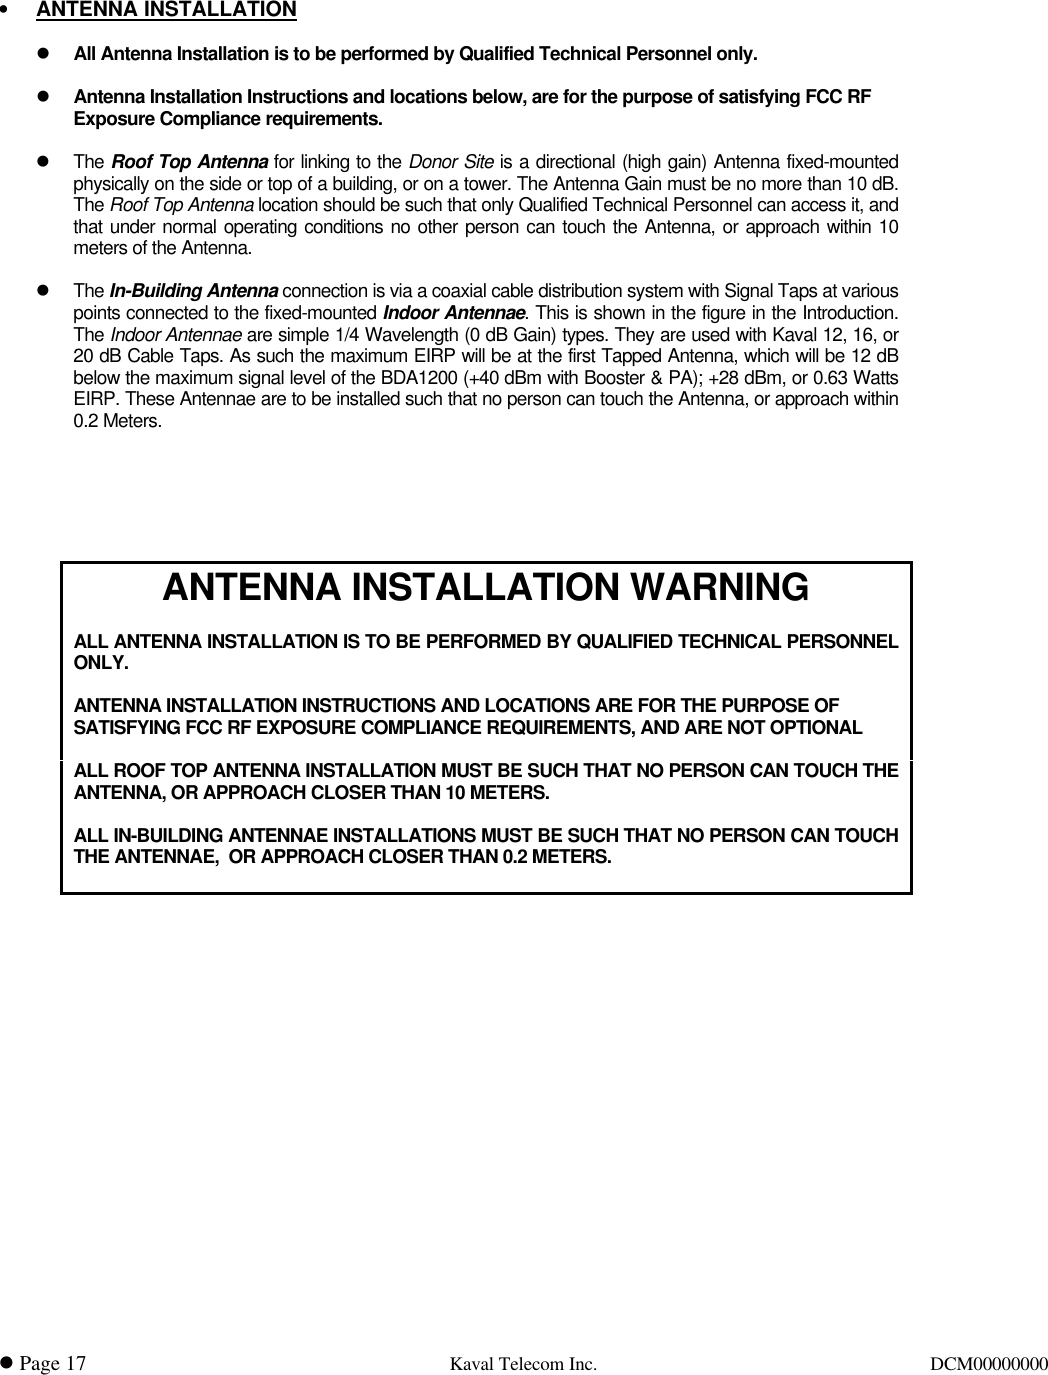 l Page 17 Kaval Telecom Inc.DCM000000001• ANTENNA INSTALLATIONl All Antenna Installation is to be performed by Qualified Technical Personnel only.l Antenna Installation Instructions and locations below, are for the purpose of satisfying FCC RFExposure Compliance requirements.lThe Roof Top Antenna for linking to the Donor Site is a directional (high gain) Antenna fixed-mountedphysically on the side or top of a building, or on a tower. The Antenna Gain must be no more than 10 dB.The Roof Top Antenna location should be such that only Qualified Technical Personnel can access it, andthat under normal operating conditions no other person can touch the Antenna, or approach within 10meters of the Antenna.lThe In-Building Antenna connection is via a coaxial cable distribution system with Signal Taps at variouspoints connected to the fixed-mounted Indoor Antennae. This is shown in the figure in the Introduction.The Indoor Antennae are simple 1/4 Wavelength (0 dB Gain) types. They are used with Kaval 12, 16, or20 dB Cable Taps. As such the maximum EIRP will be at the first Tapped Antenna, which will be 12 dBbelow the maximum signal level of the BDA1200 (+40 dBm with Booster &amp; PA); +28 dBm, or 0.63 WattsEIRP. These Antennae are to be installed such that no person can touch the Antenna, or approach within0.2 Meters.ANTENNA INSTALLATION WARNINGALL ANTENNA INSTALLATION IS TO BE PERFORMED BY QUALIFIED TECHNICAL PERSONNELONLY.ANTENNA INSTALLATION INSTRUCTIONS AND LOCATIONS ARE FOR THE PURPOSE OFSATISFYING FCC RF EXPOSURE COMPLIANCE REQUIREMENTS, AND ARE NOT OPTIONALALL ROOF TOP ANTENNA INSTALLATION MUST BE SUCH THAT NO PERSON CAN TOUCH THEANTENNA, OR APPROACH CLOSER THAN 10 METERS.ALL IN-BUILDING ANTENNAE INSTALLATIONS MUST BE SUCH THAT NO PERSON CAN TOUCHTHE ANTENNAE,  OR APPROACH CLOSER THAN 0.2 METERS.